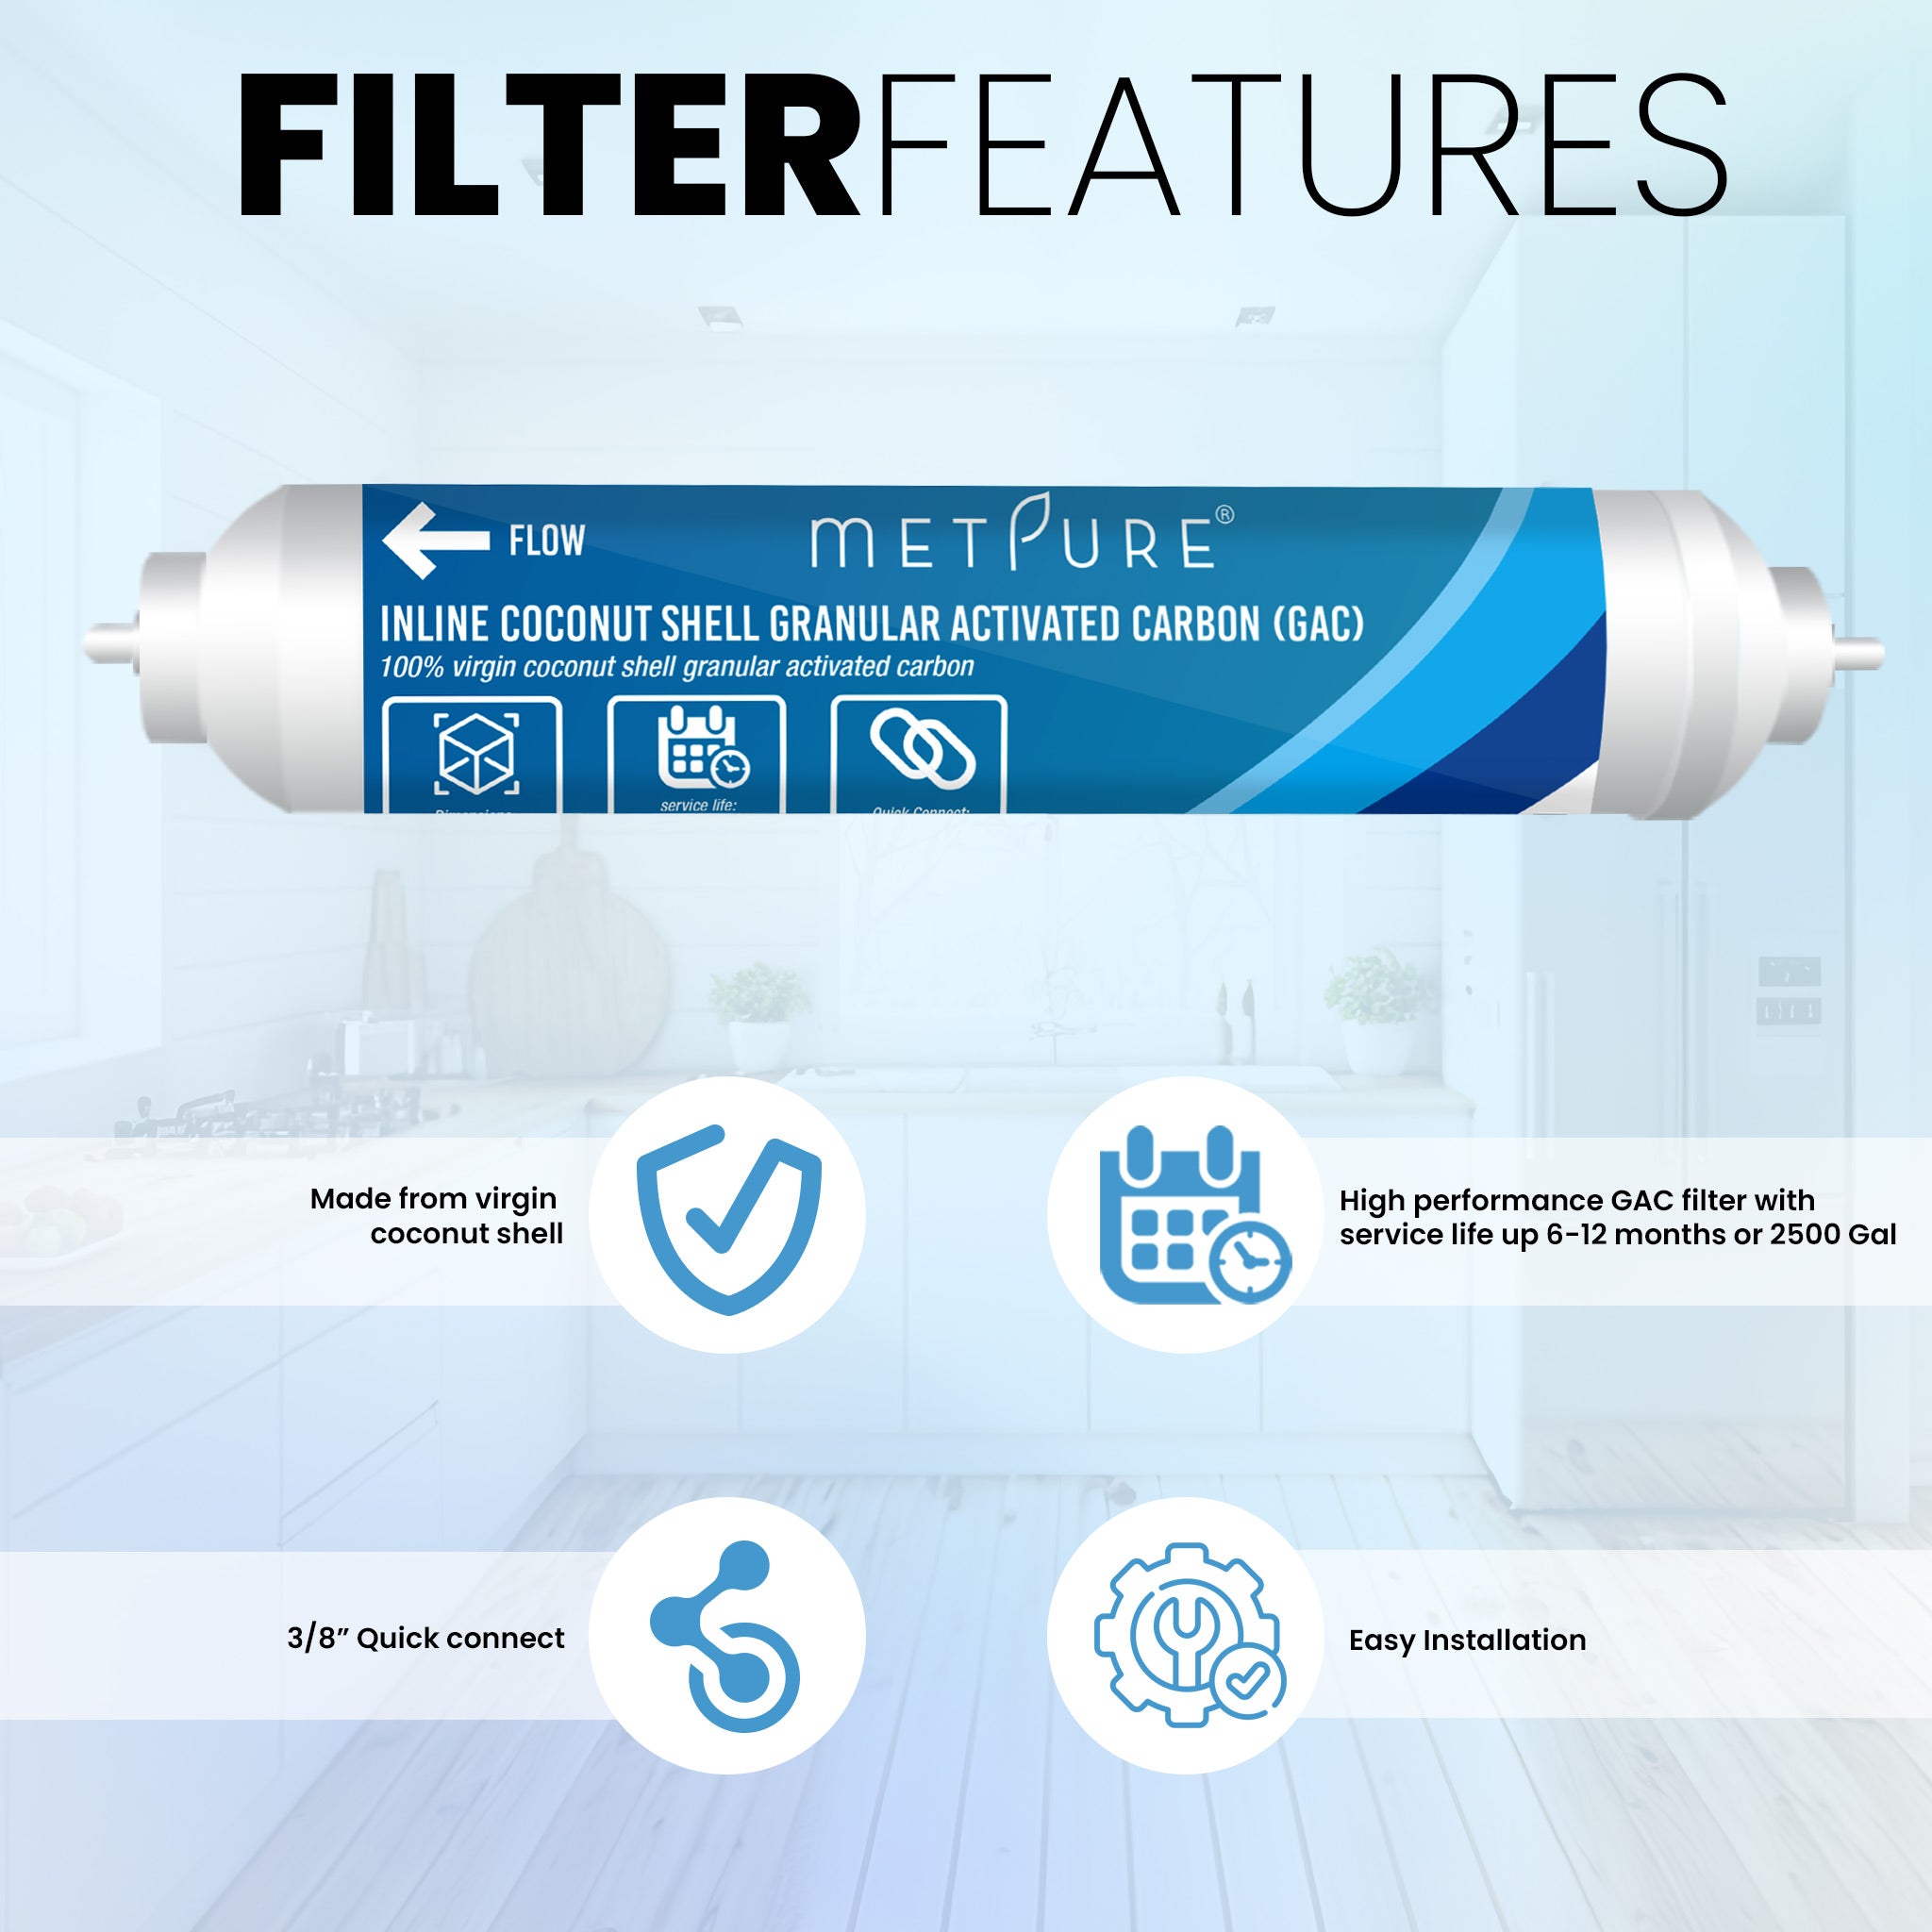 Metpure 2" x 10" RO Carbon Post Filter GAC Coconut Shell Granular Activated Carbon 3/8 Inline Water Filter for Reverse Osmosis Water Filter System, Refrigerator, Ice Maker. 3/8" Quick Connect.